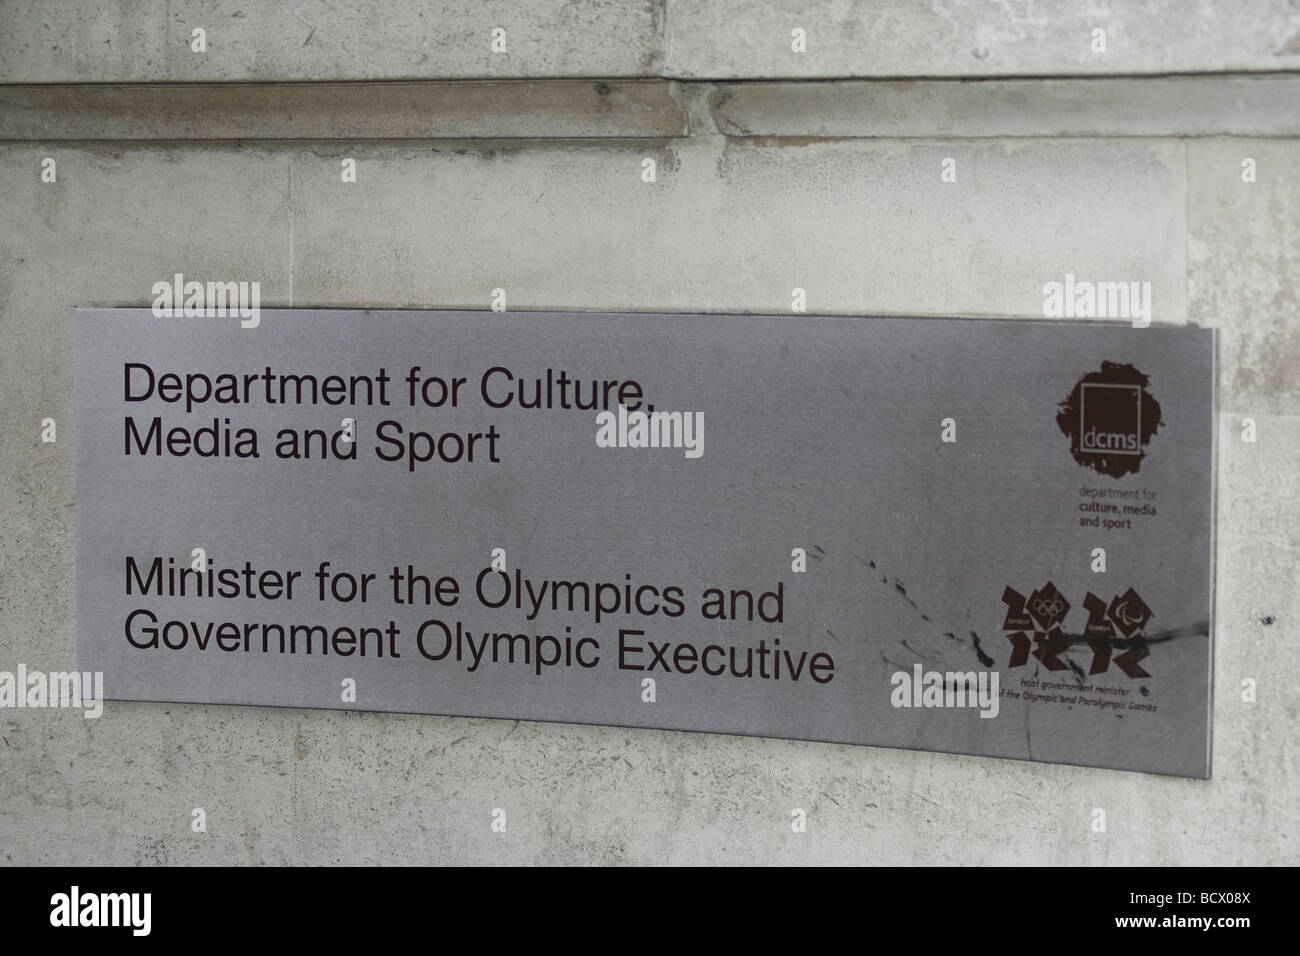 Department for Culture, Media and Sport Stock Photo